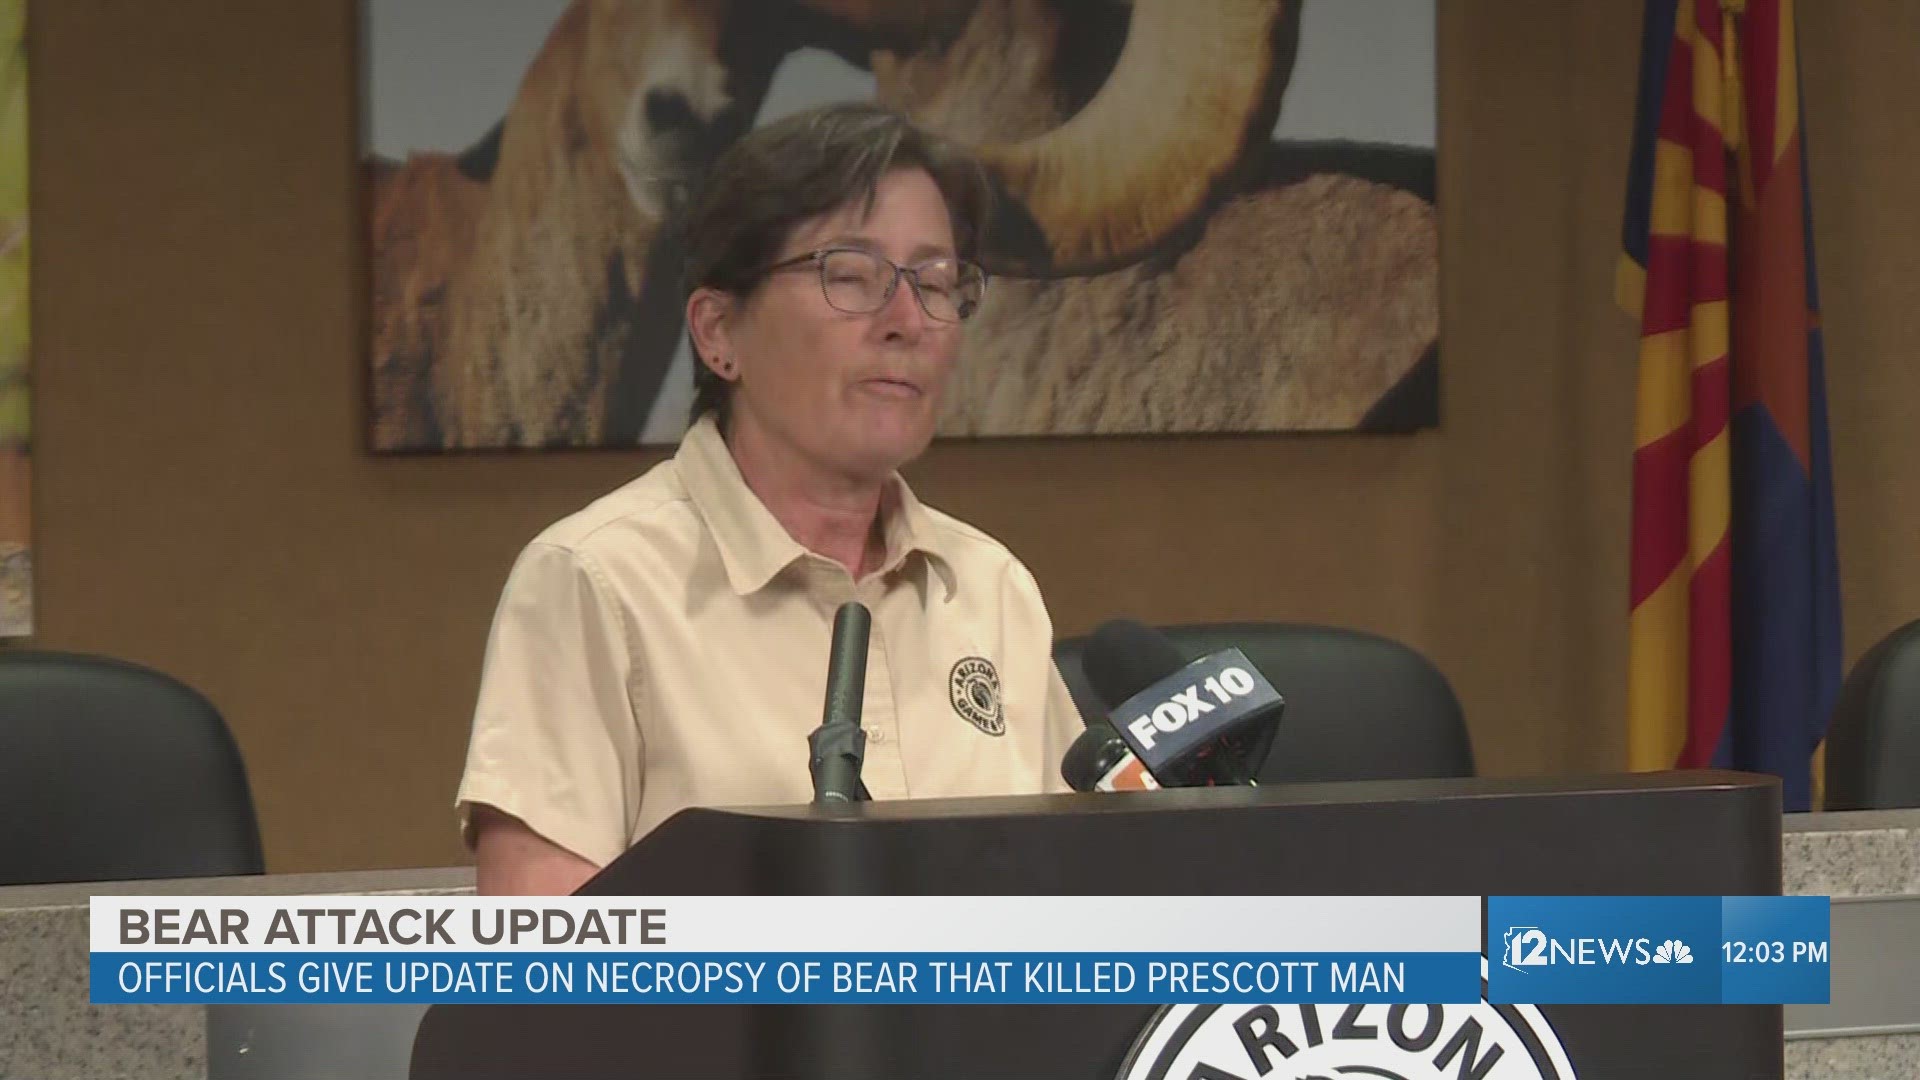 Officials give an update on the necropsy of a bear that attacked and killed a man near Prescott earlier this month.